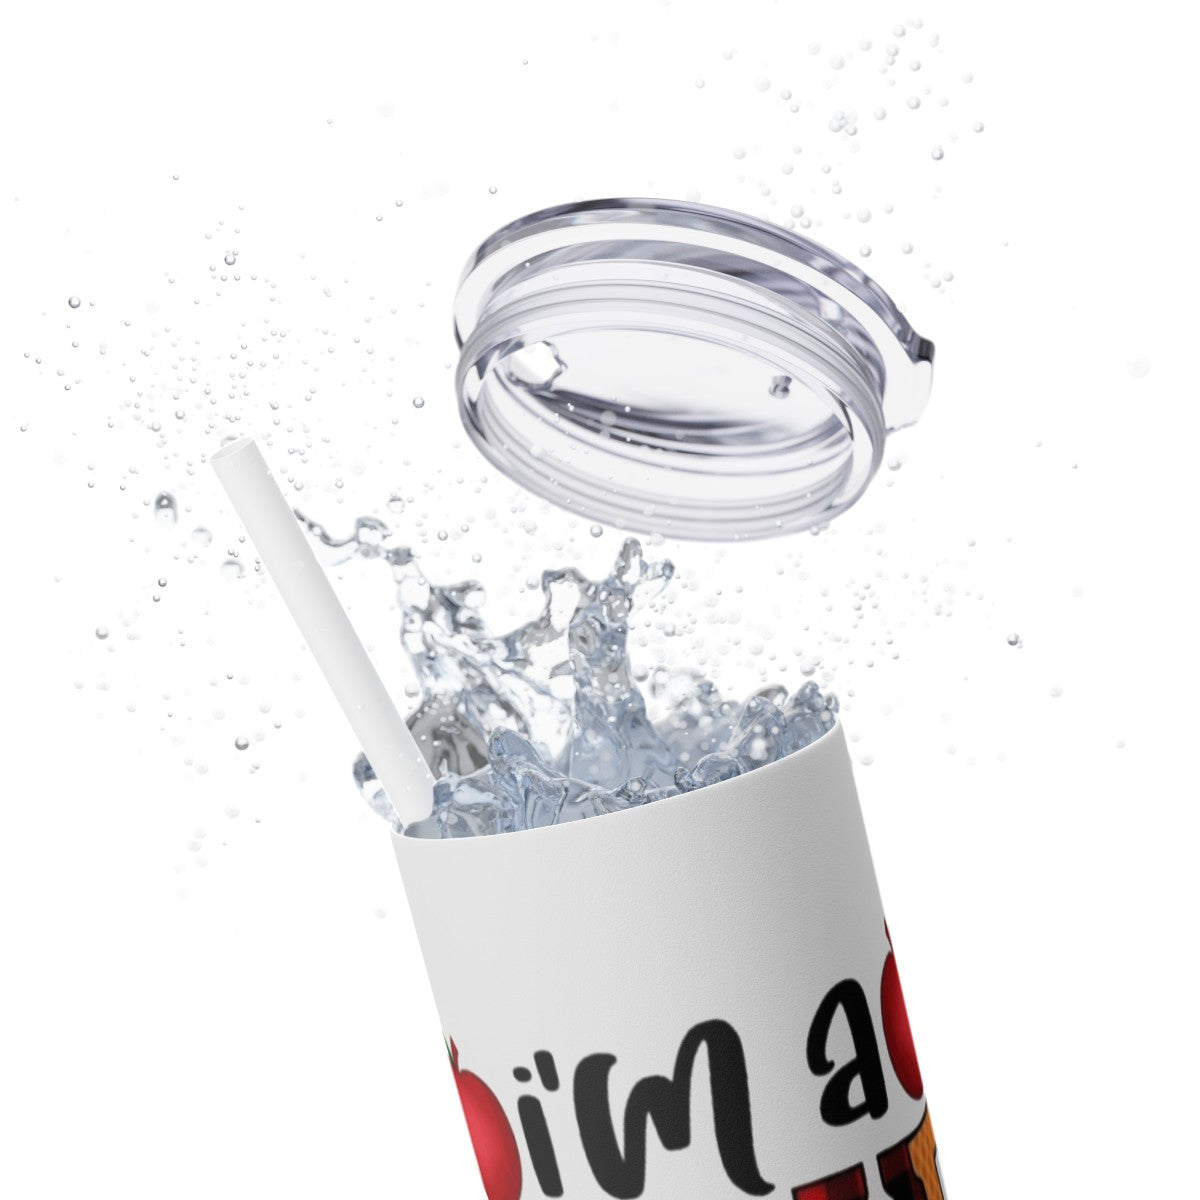 Get trendy with I'm a Teacher, What's Your Super[ower? Skinny Tumbler with Straw, 20oz -  available at Good Gift Company. Grab yours for $44.20 today!